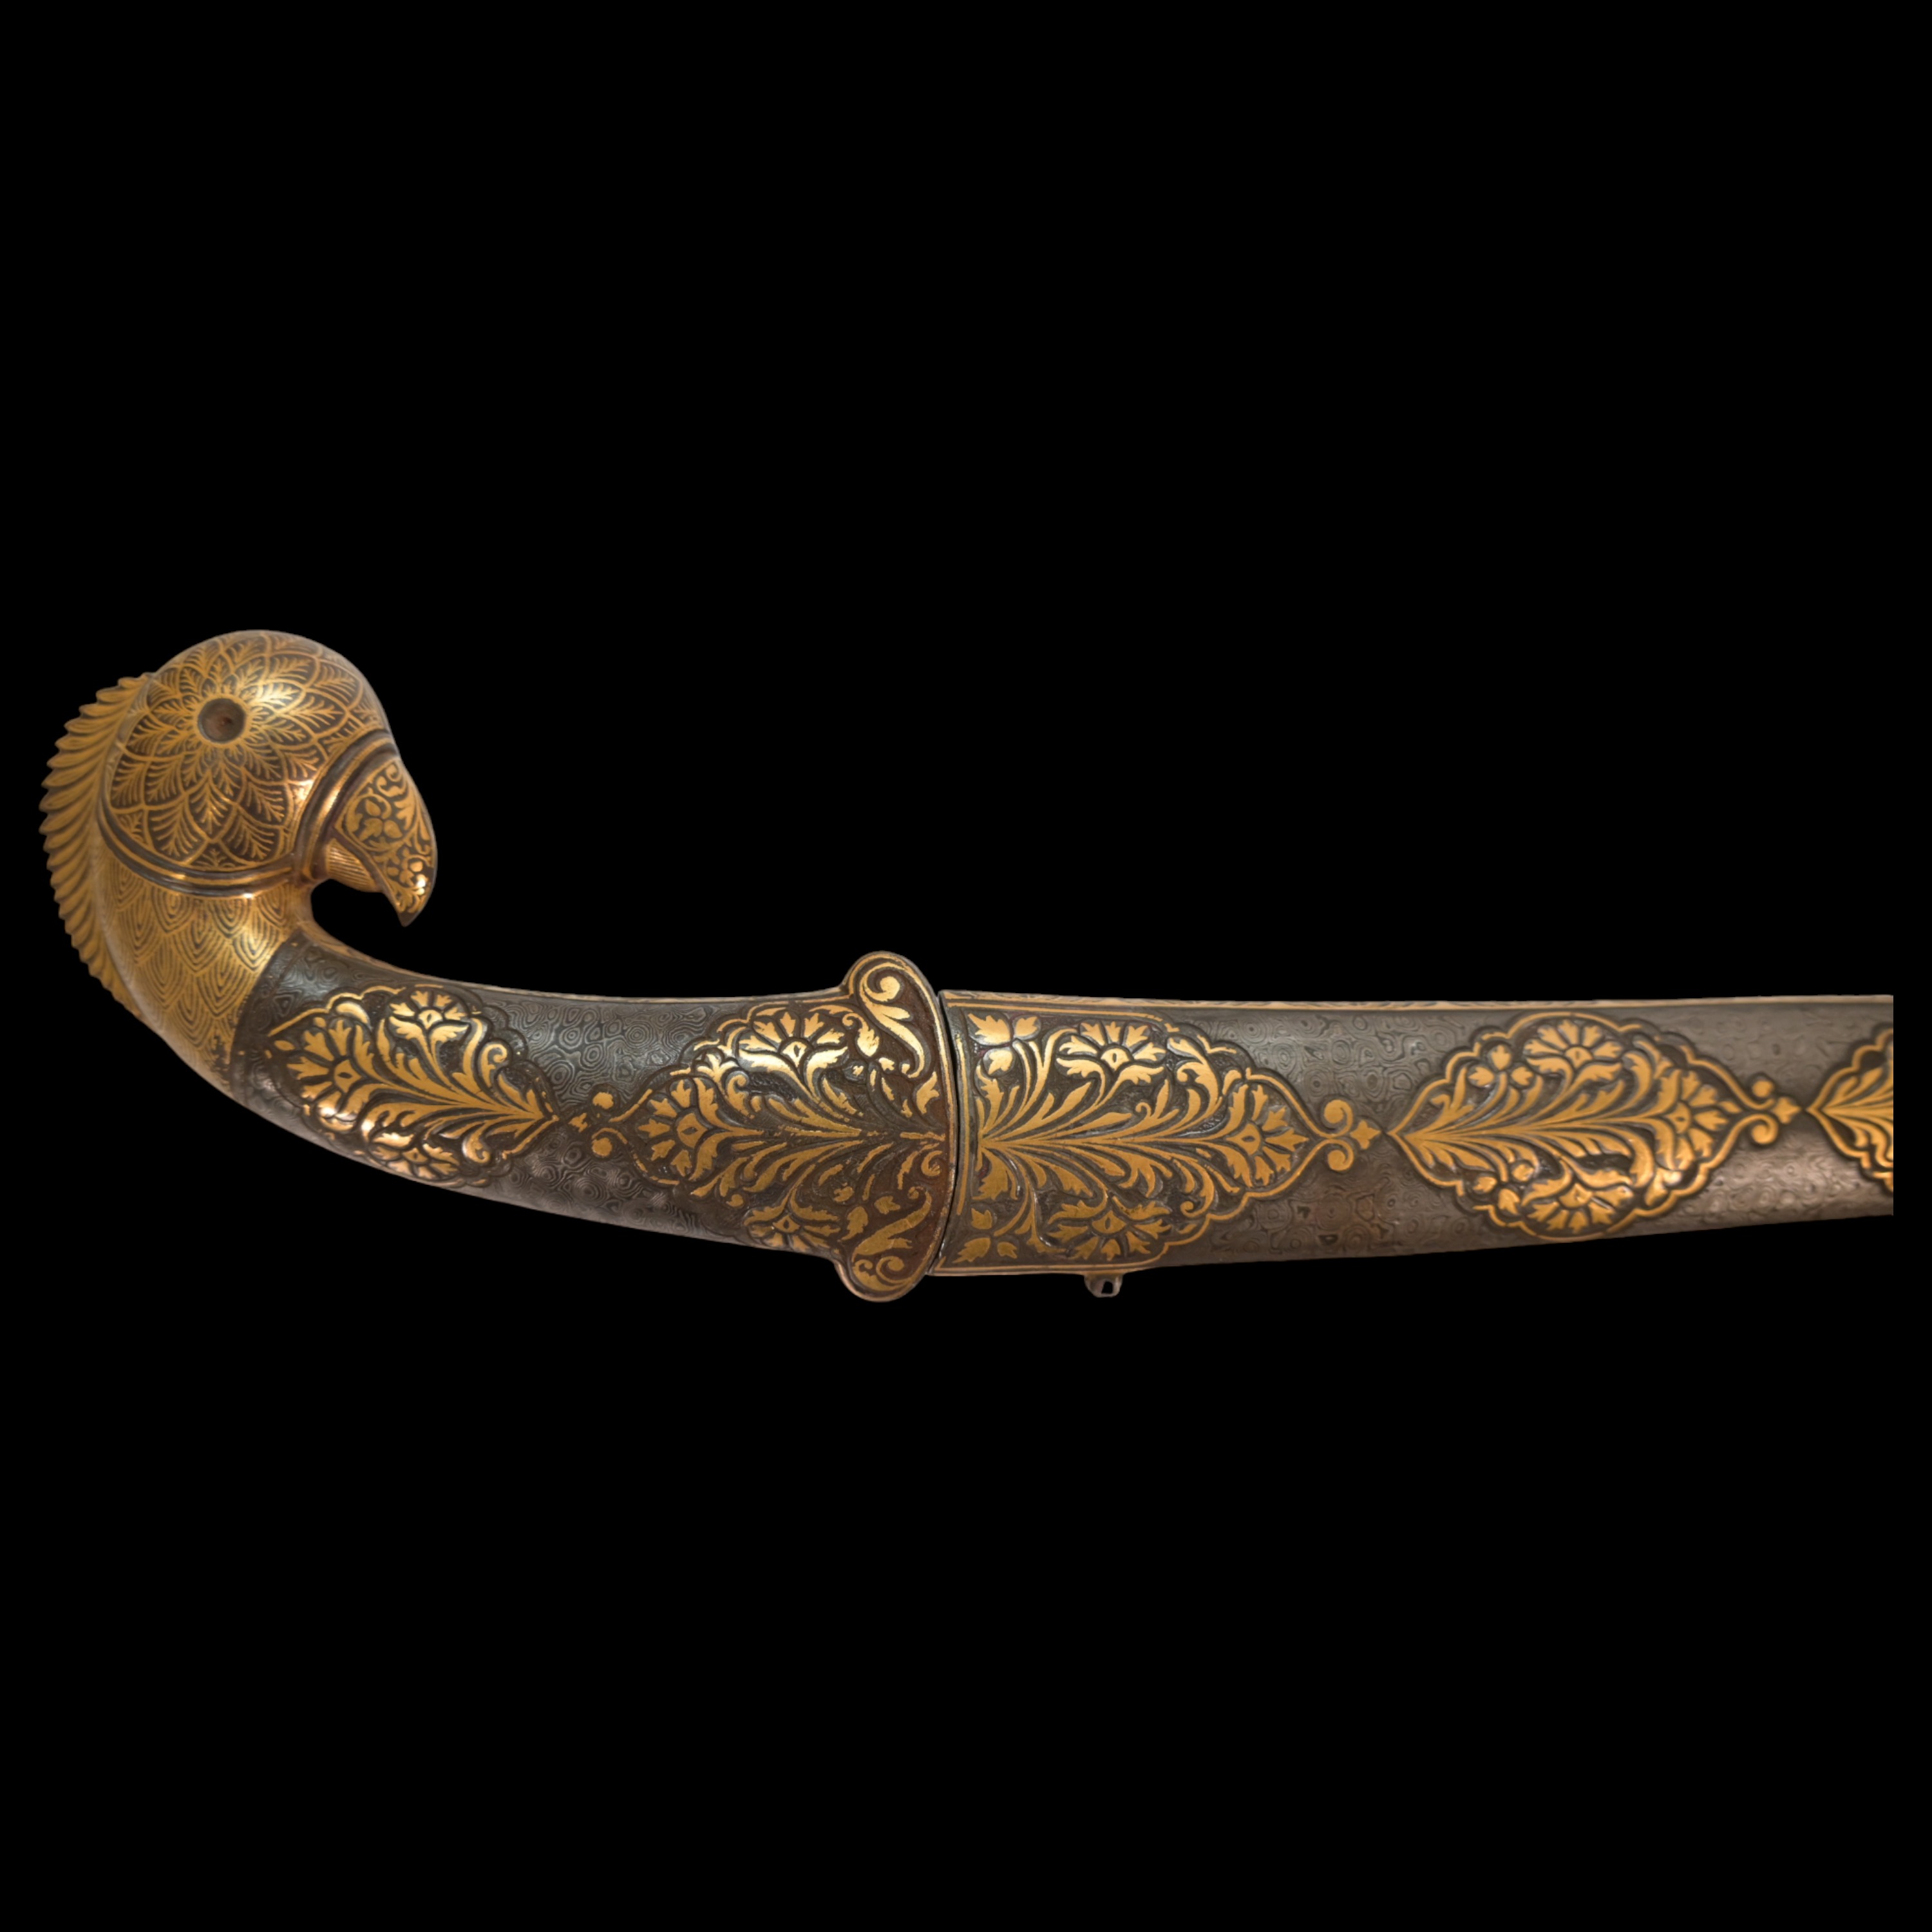 Richly decorated gold kofgari Indian dagger with wootz blade, 19th century. - Image 4 of 12